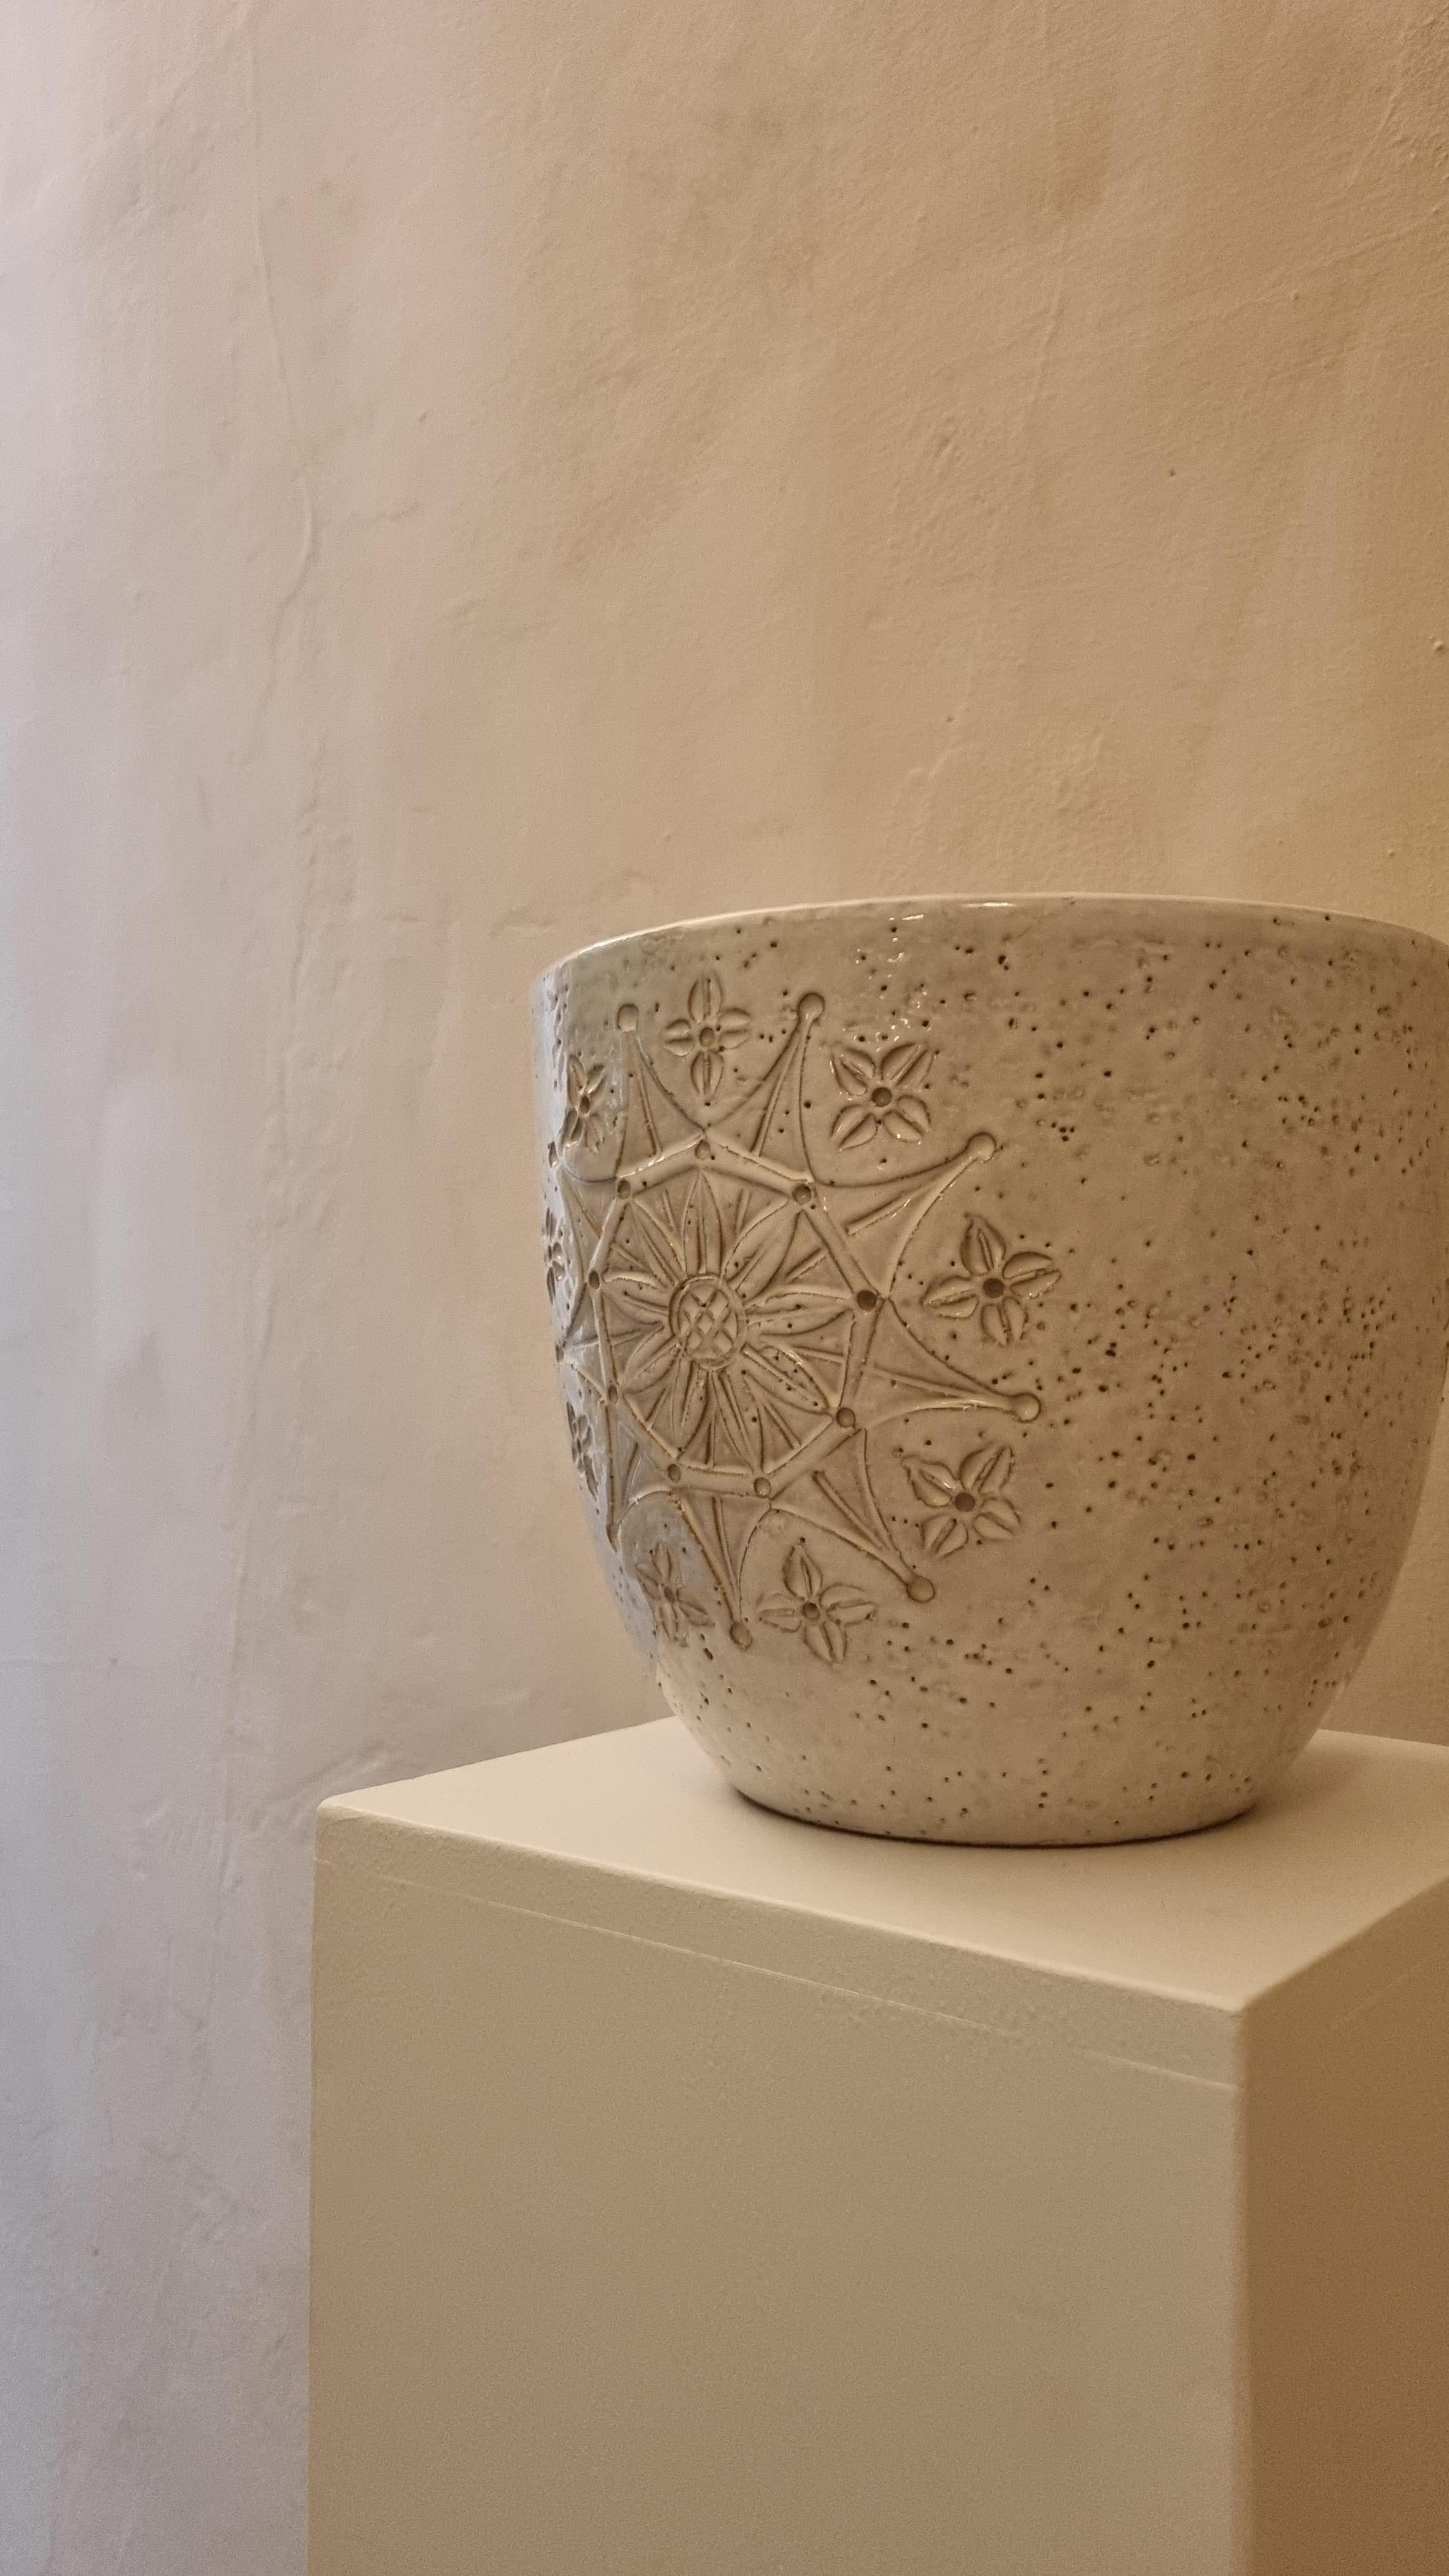 Rare Ceramic planter of the Siviglia series by Aldo Londi for Ceramiche Bitossi Montelupo, 60s.
Glazed ceramic,  engraving .
Each work created by Bitossi follows a very complex working process, both in the formal and decorative part.
The realization